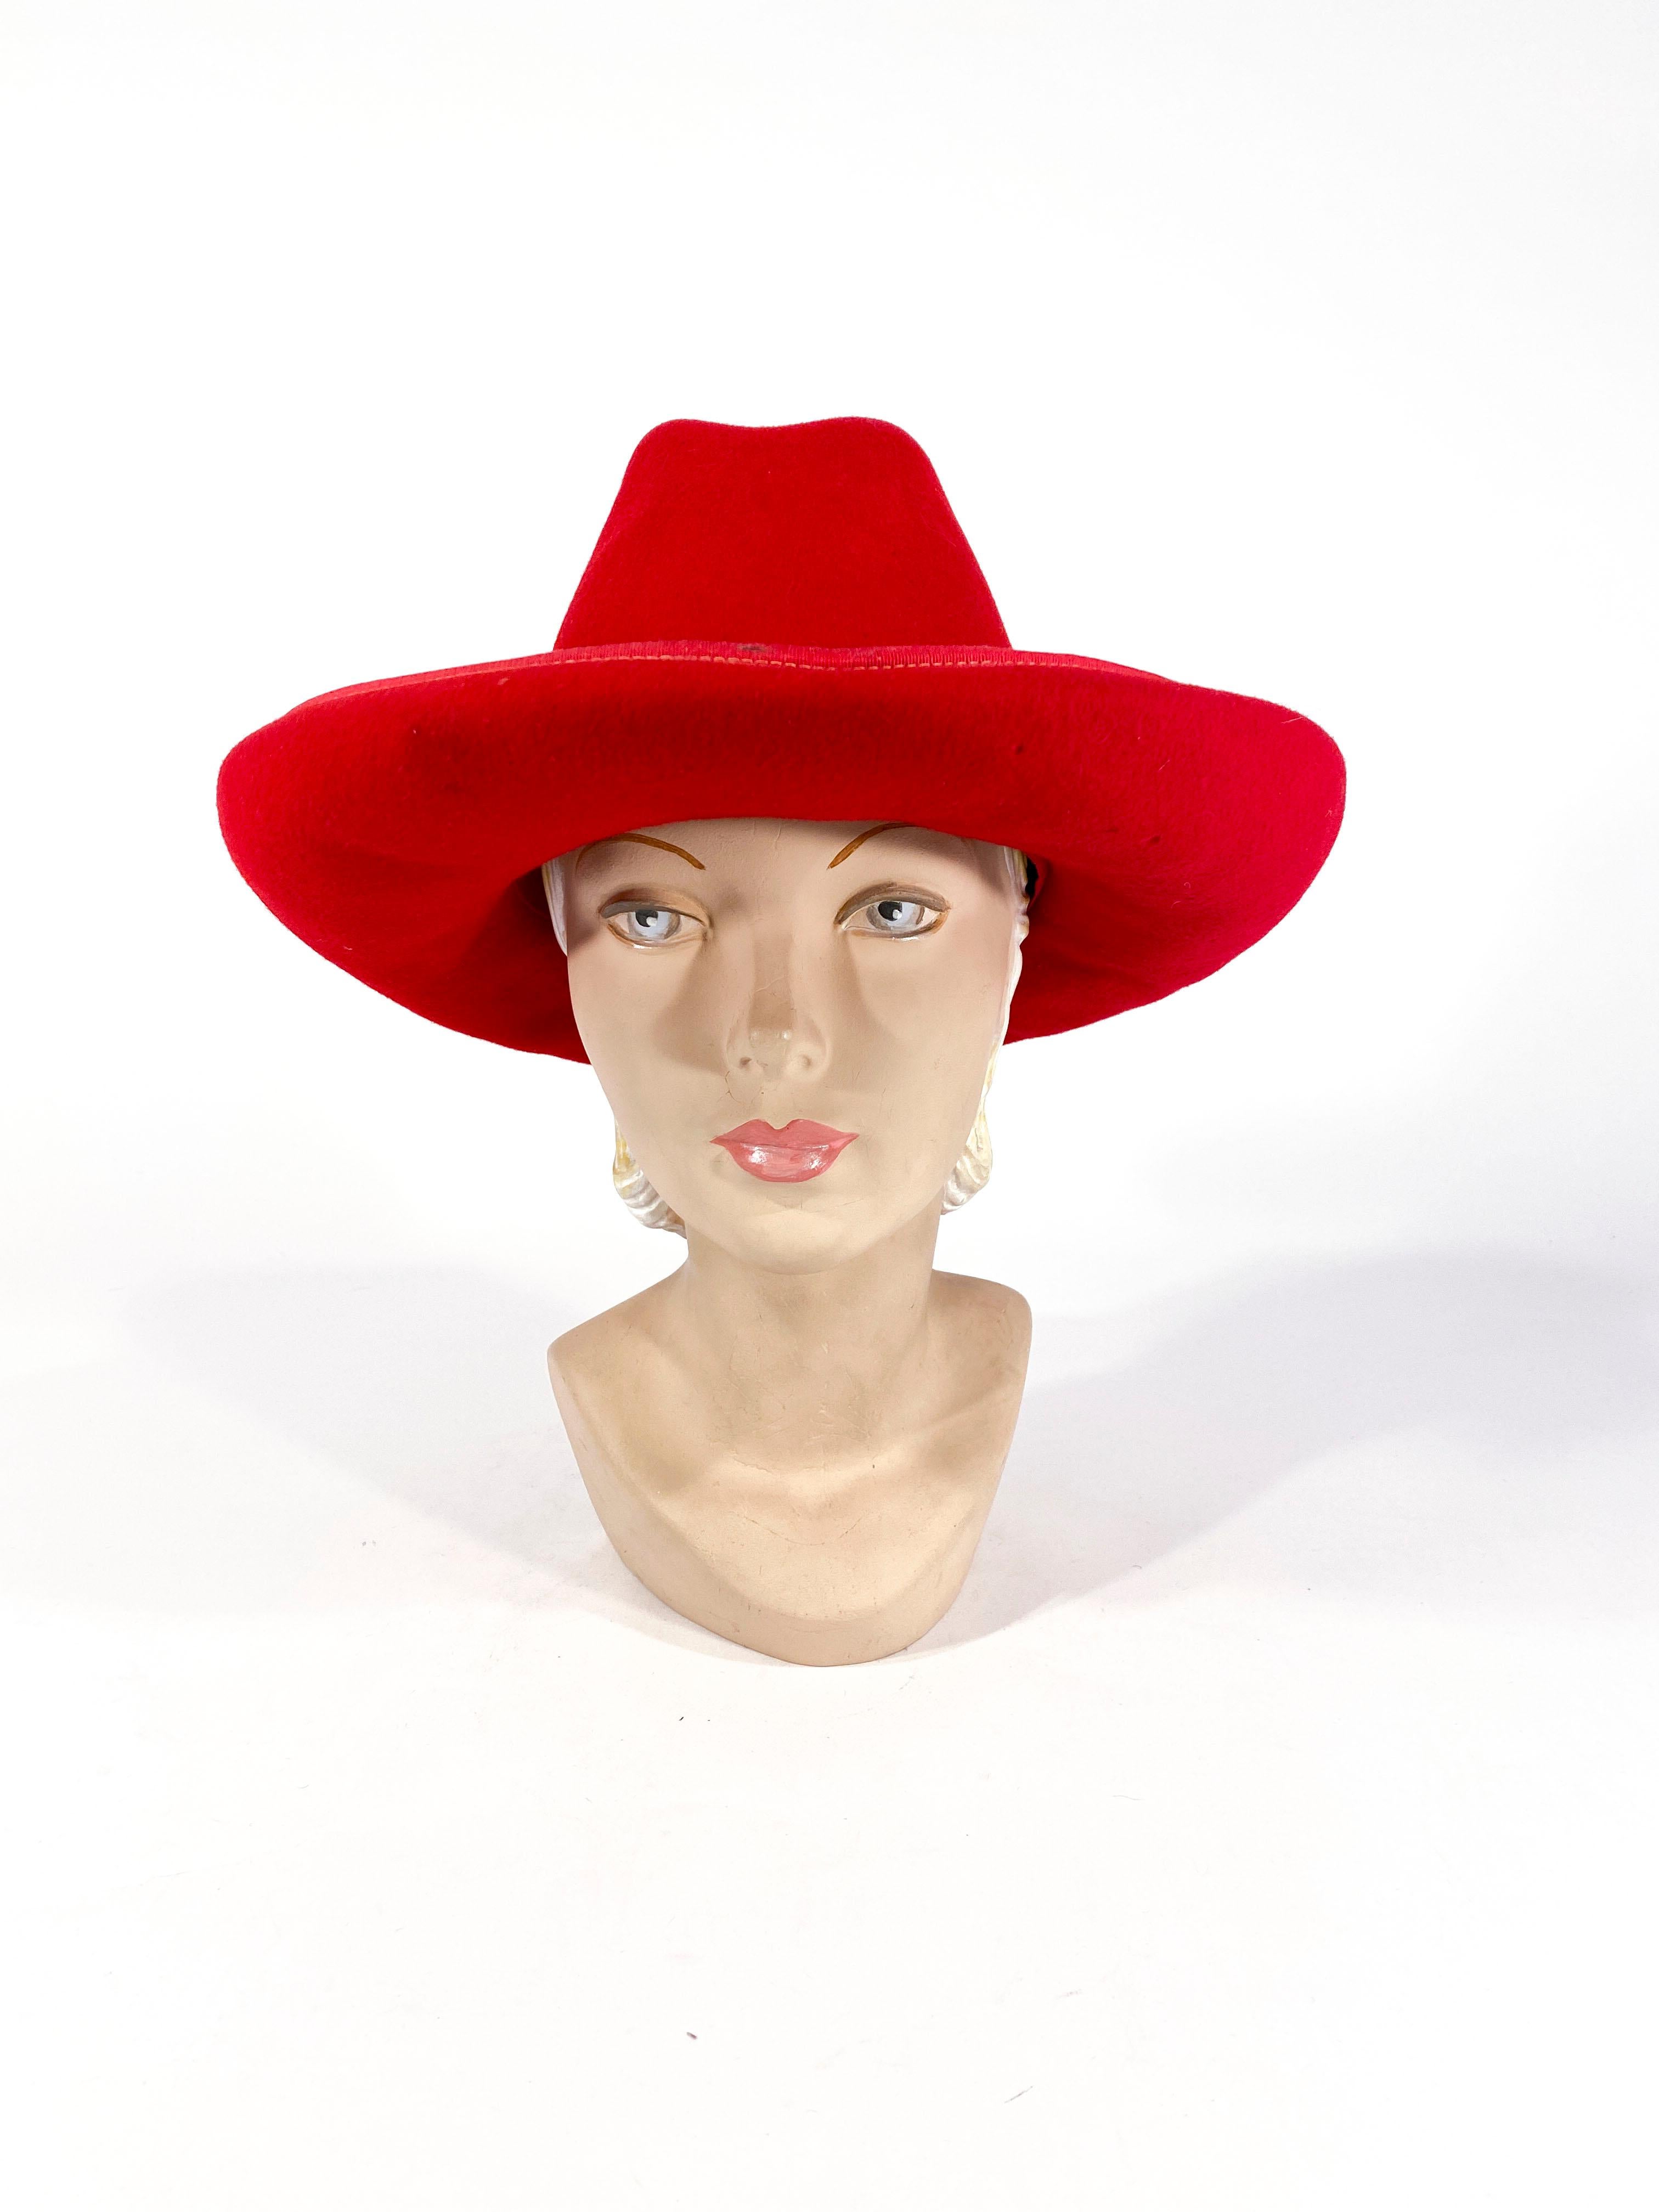 Late 1960s to early 1970s red fur felt hat with wide rolled brim trimmed with grosgrain to match the hatband. The high crown of this western hat is hand-sculpeted and structure with an interior band.